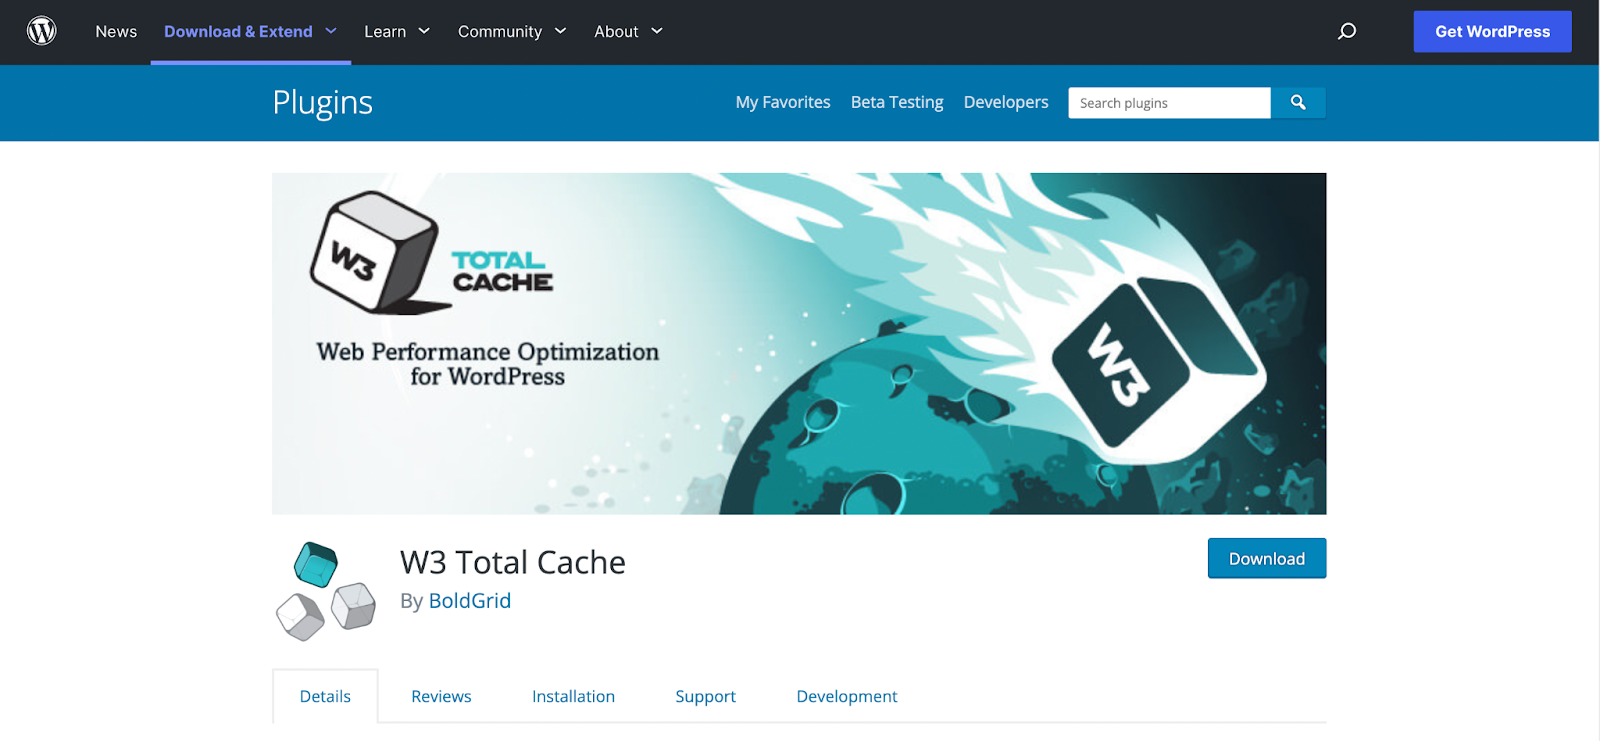 W3 Total Cache makes it easier to manage all of the benefits on website in one place